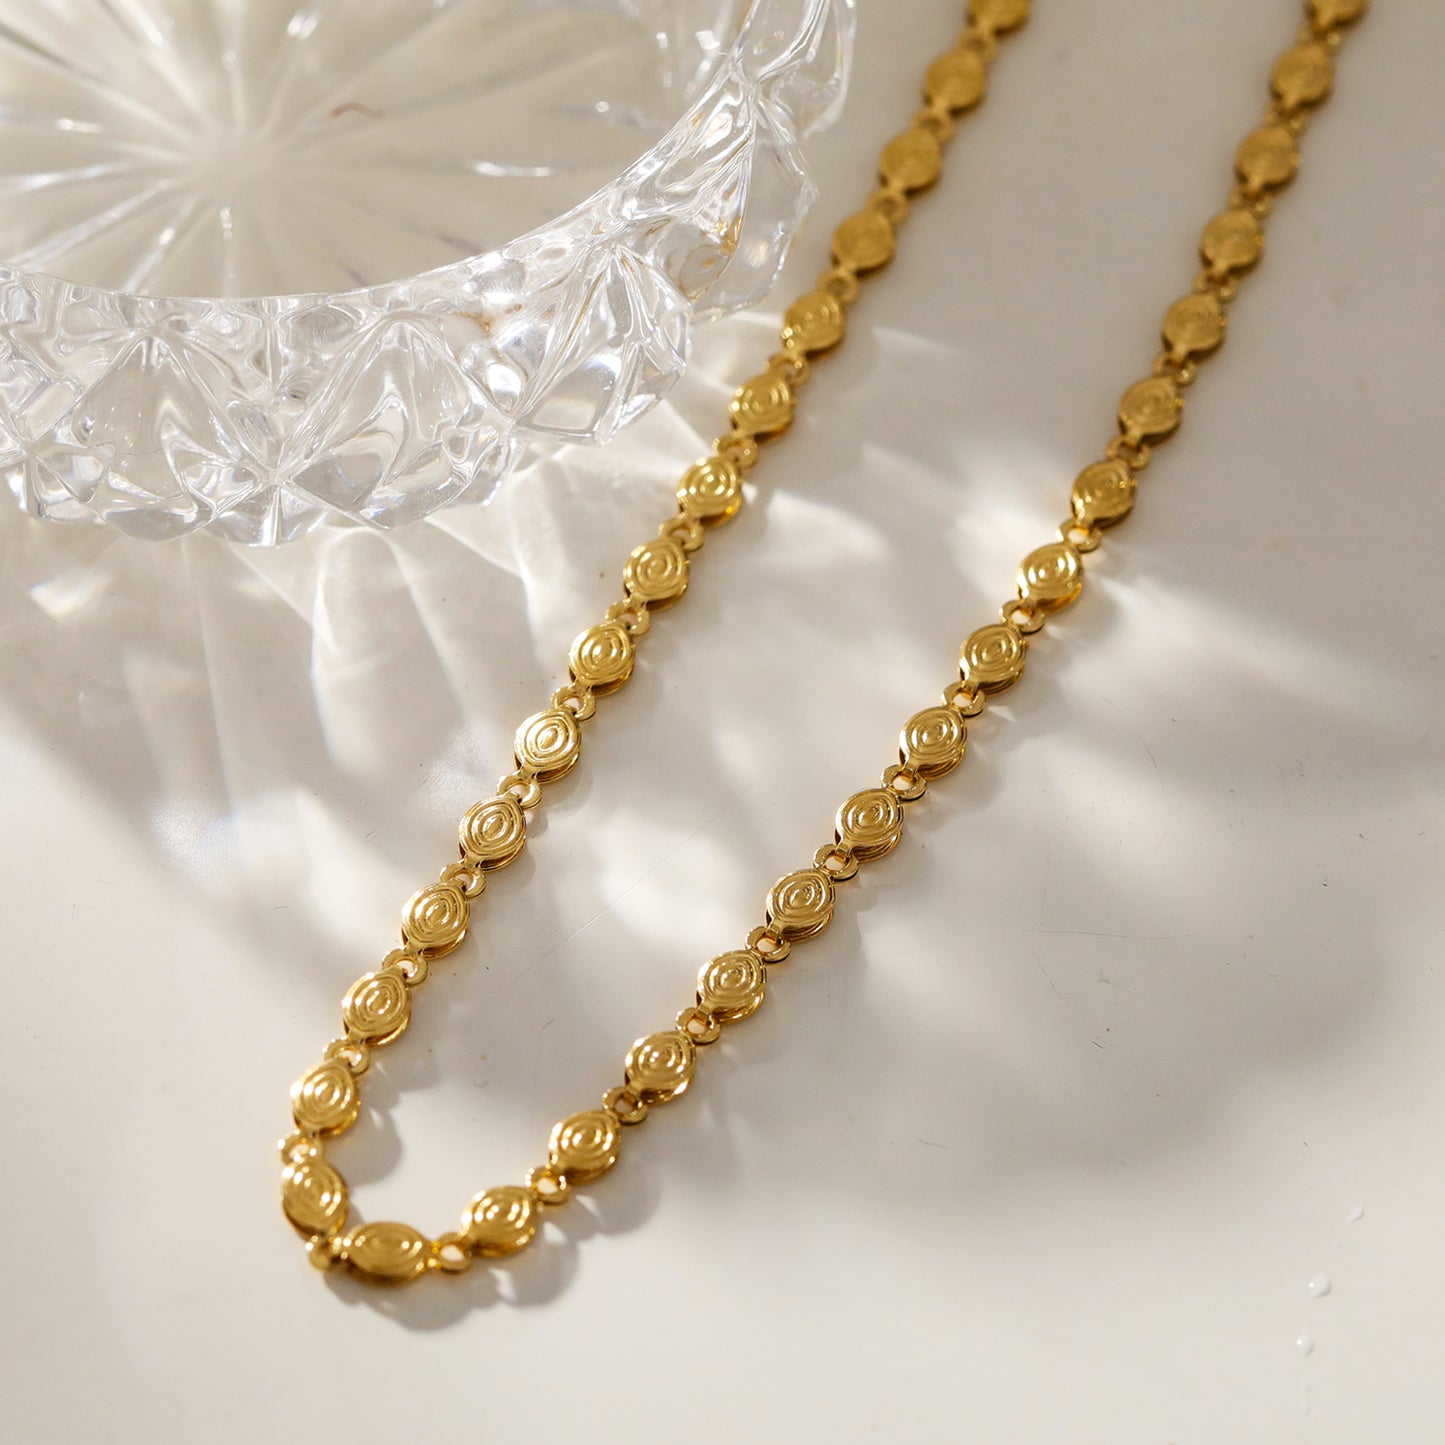 Style ANTHEA 85590: Patterned Oval Beaded Chain Necklace. | HACKNEY-NINE